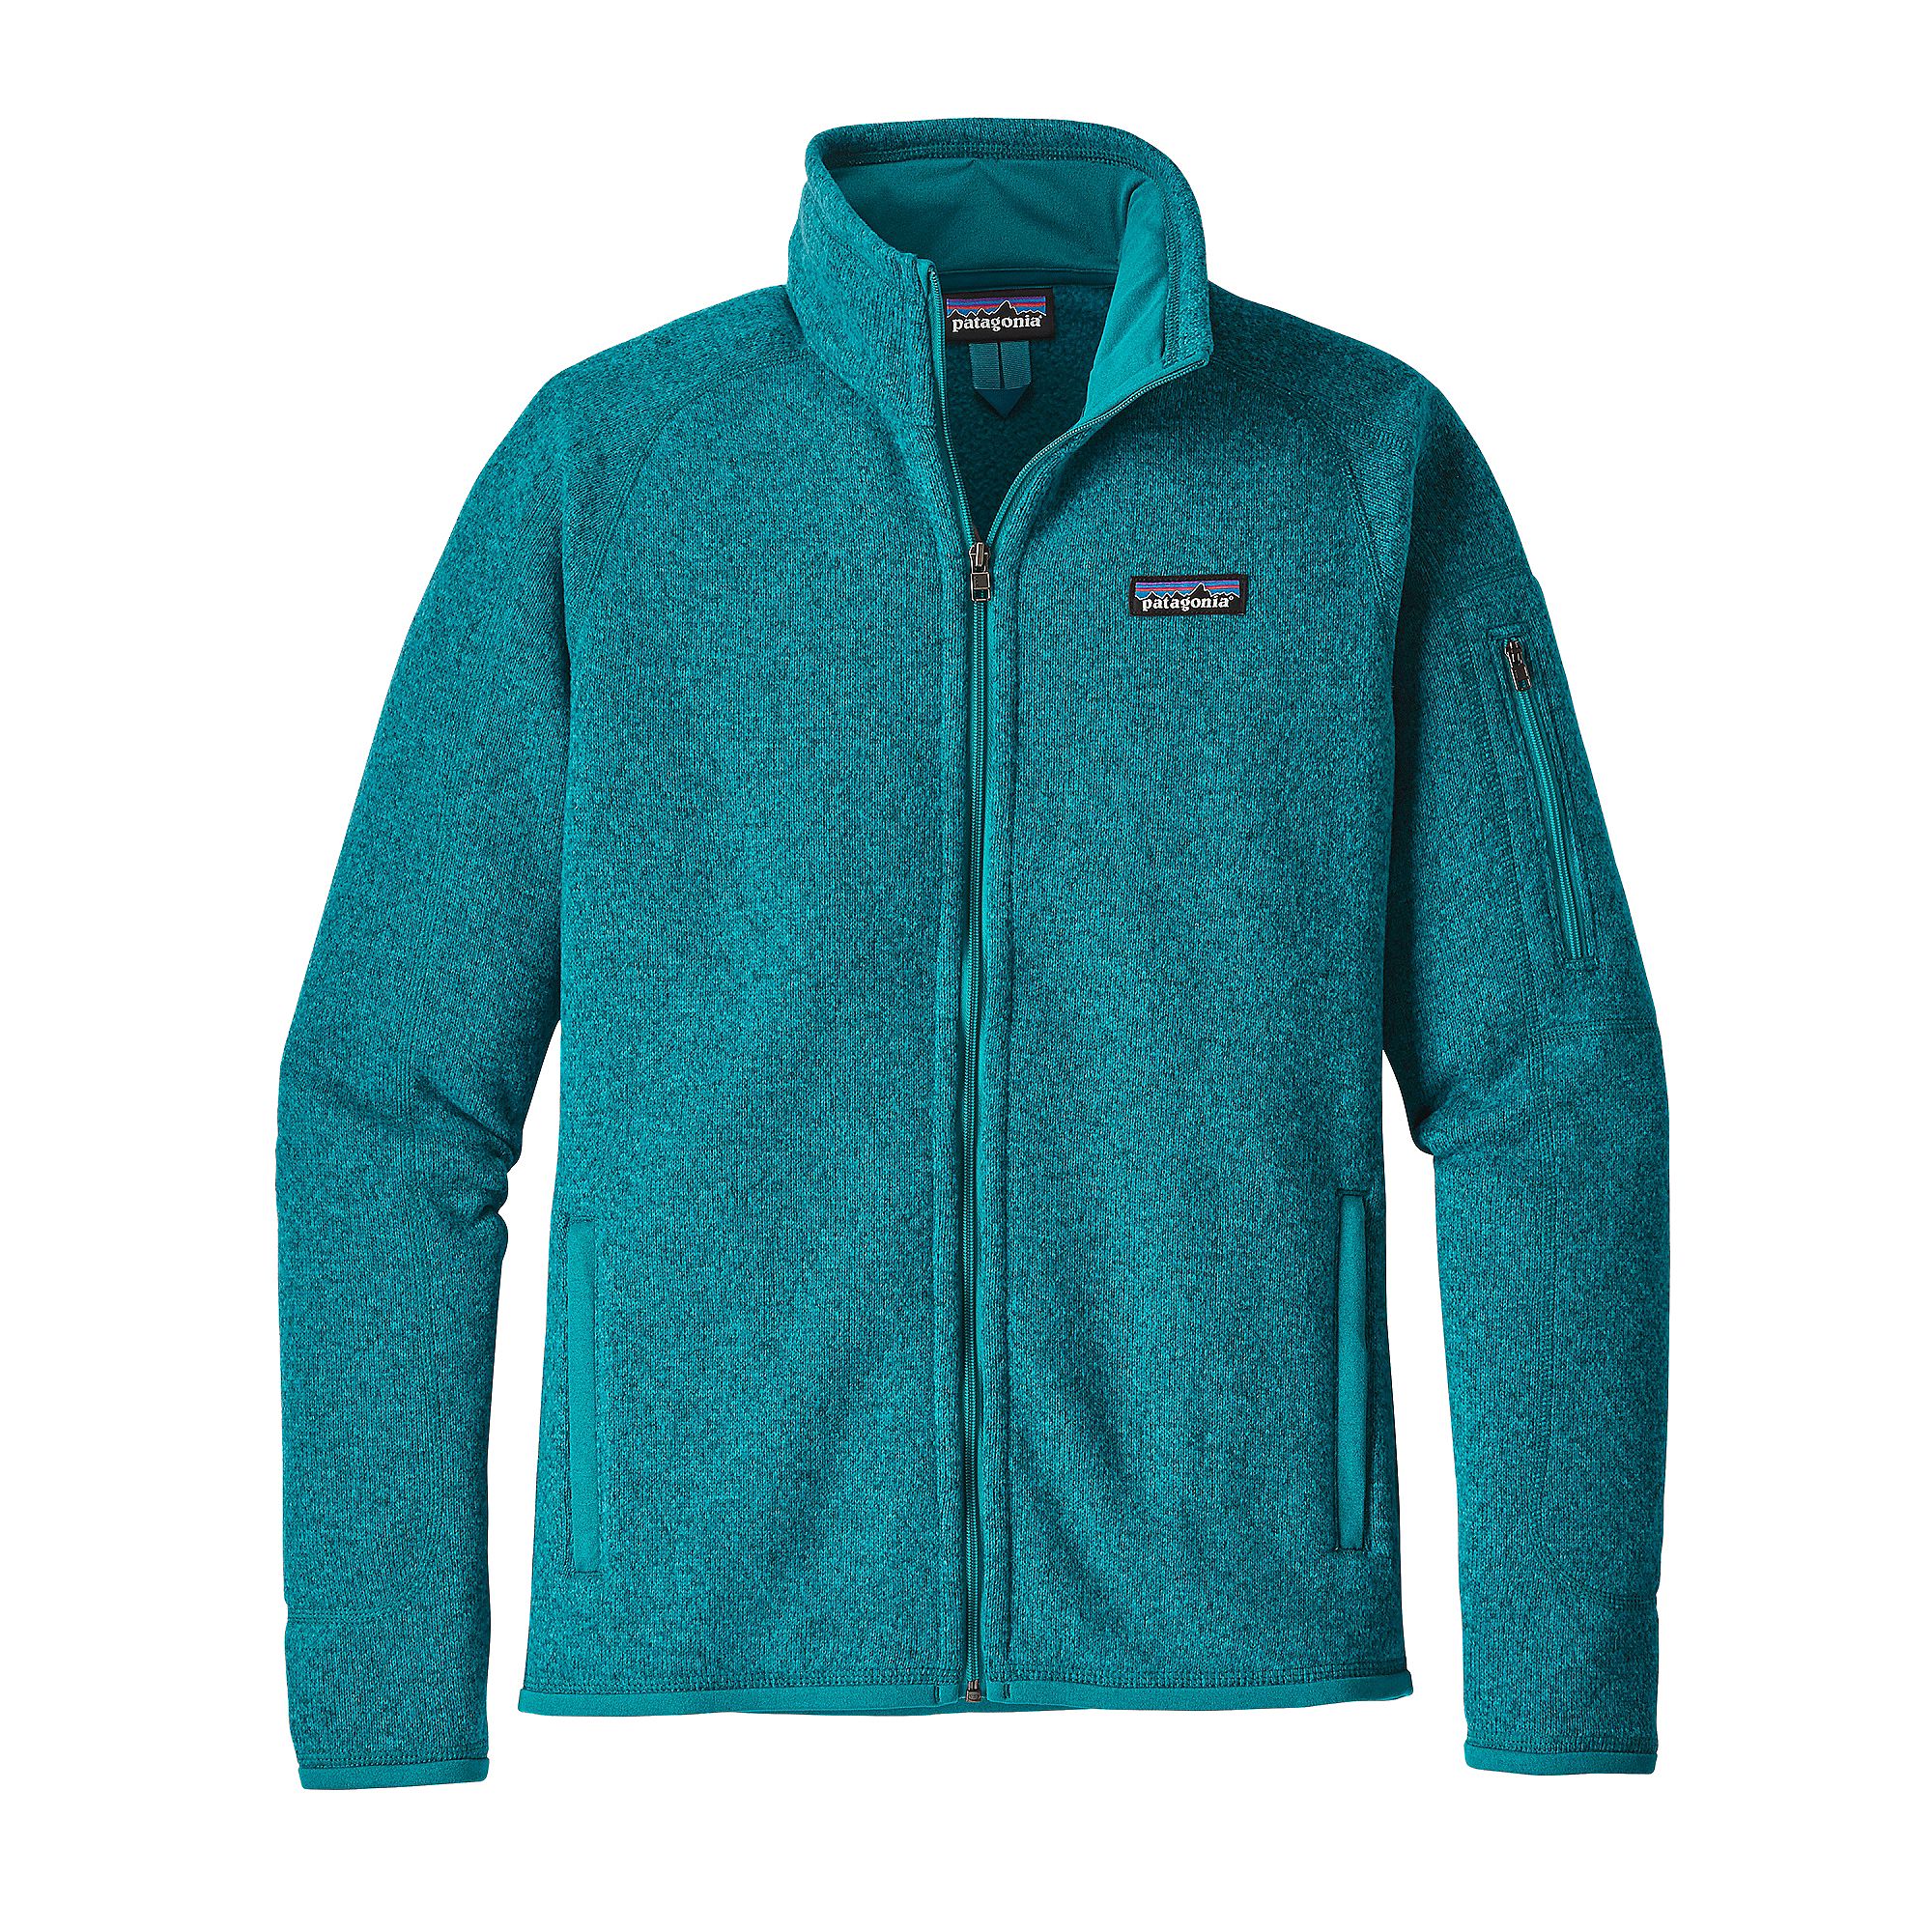 Patagonia Women's Better Sweater Jacket - Active Endeavors